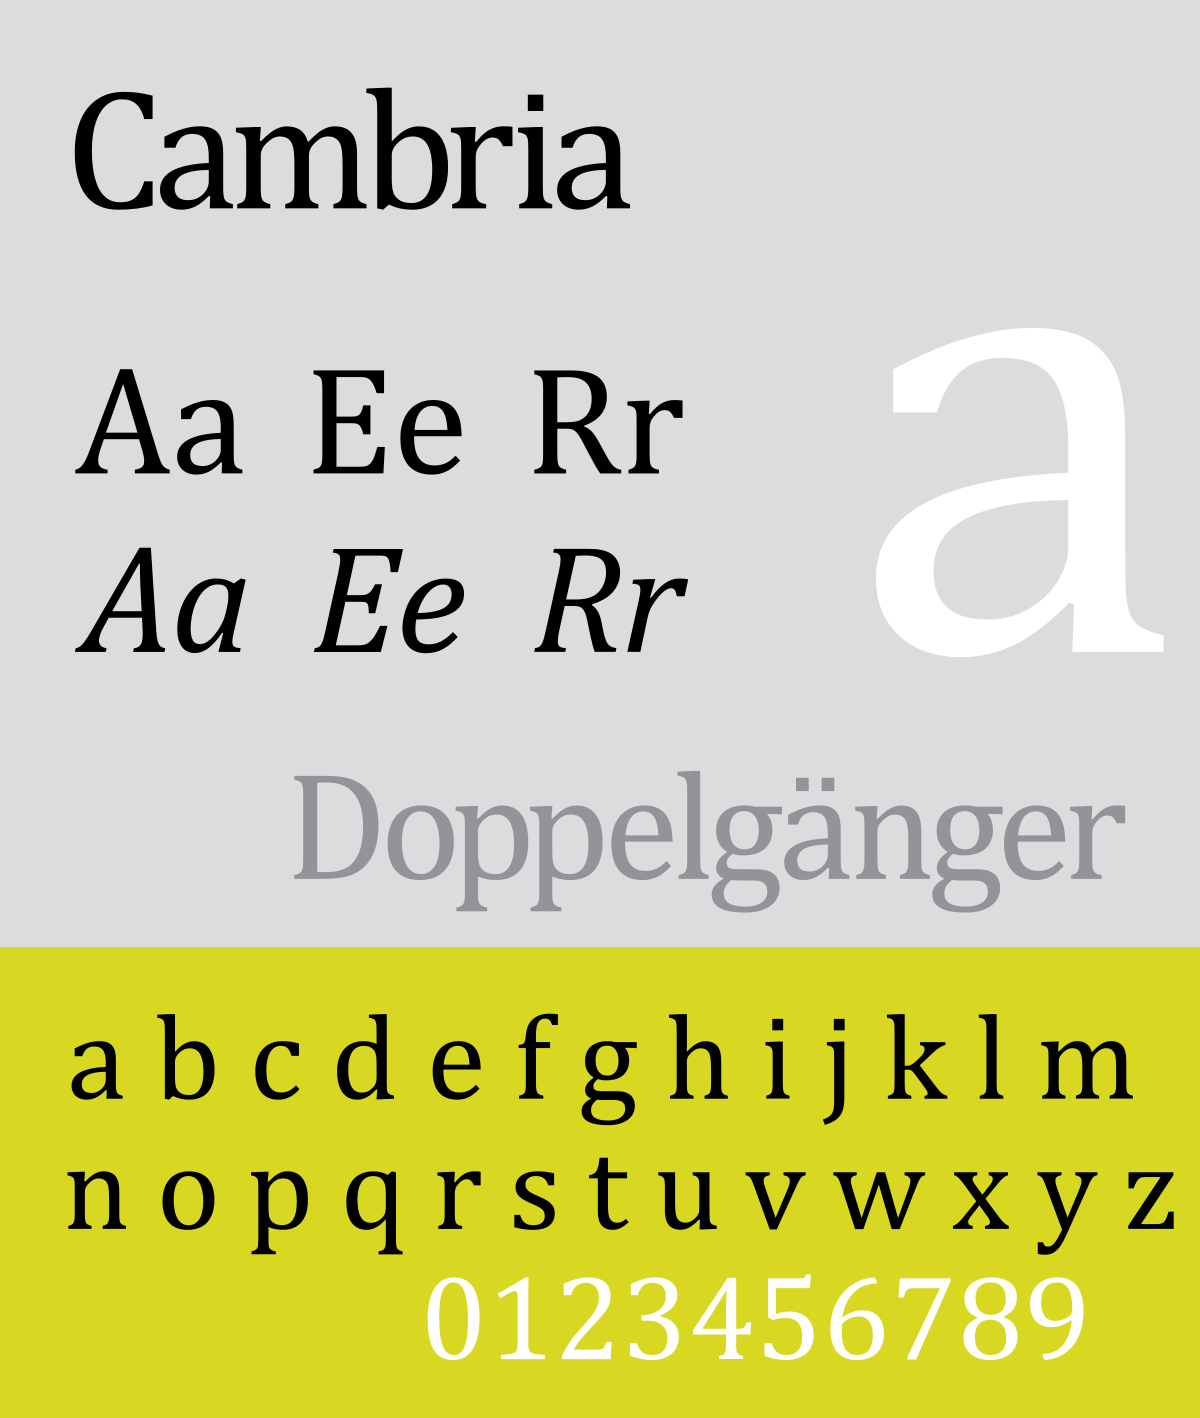 cambria font free download for mac